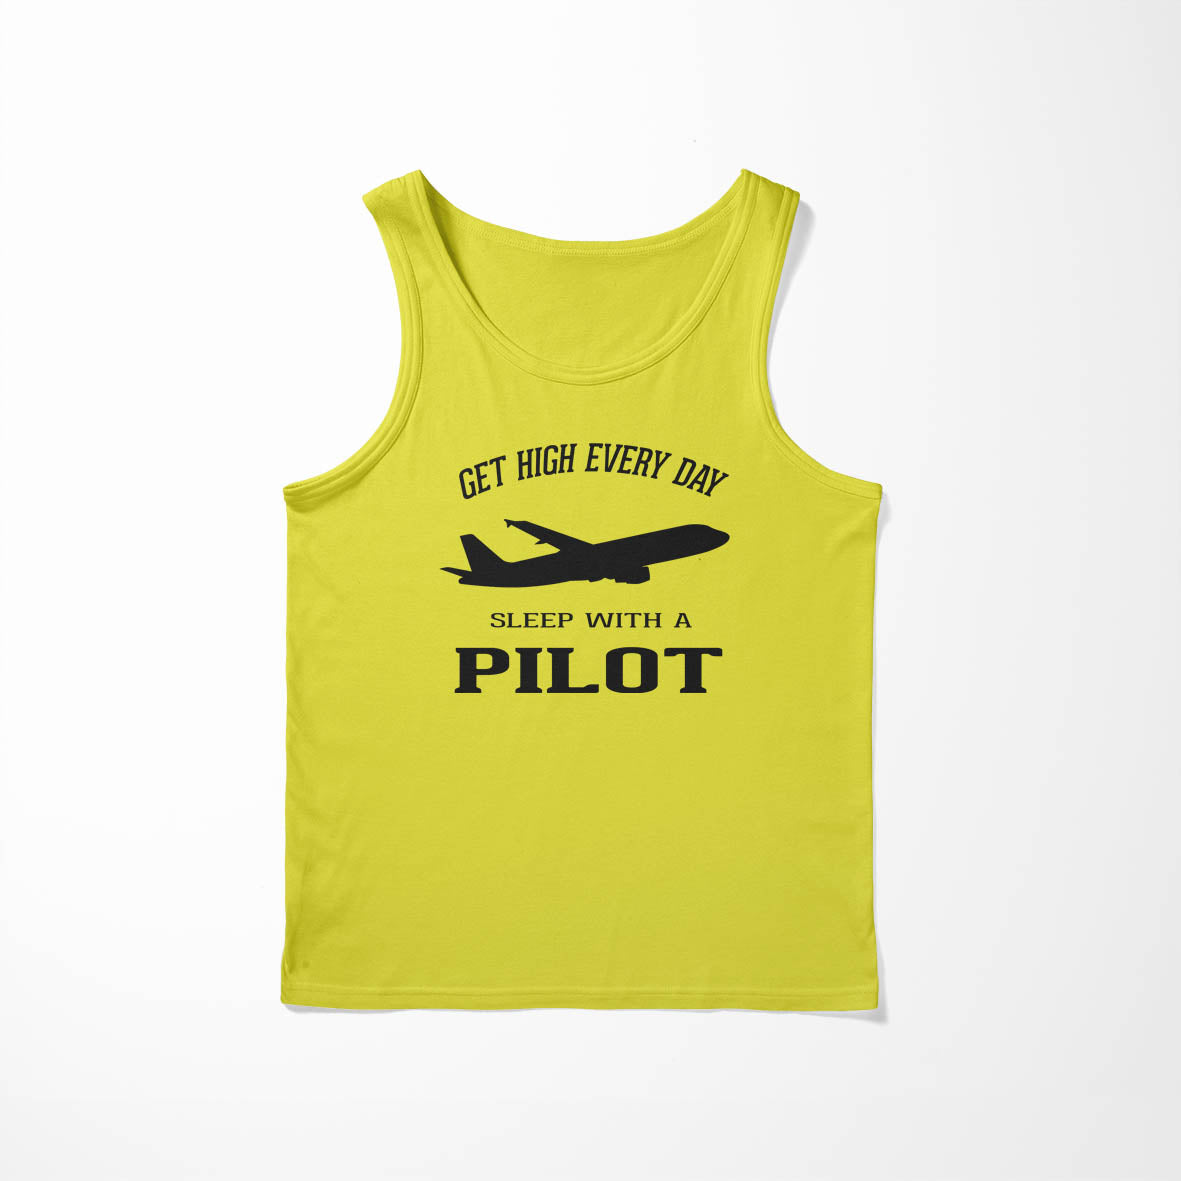 Get High Every Day Sleep With A Pilot Designed Tank Tops